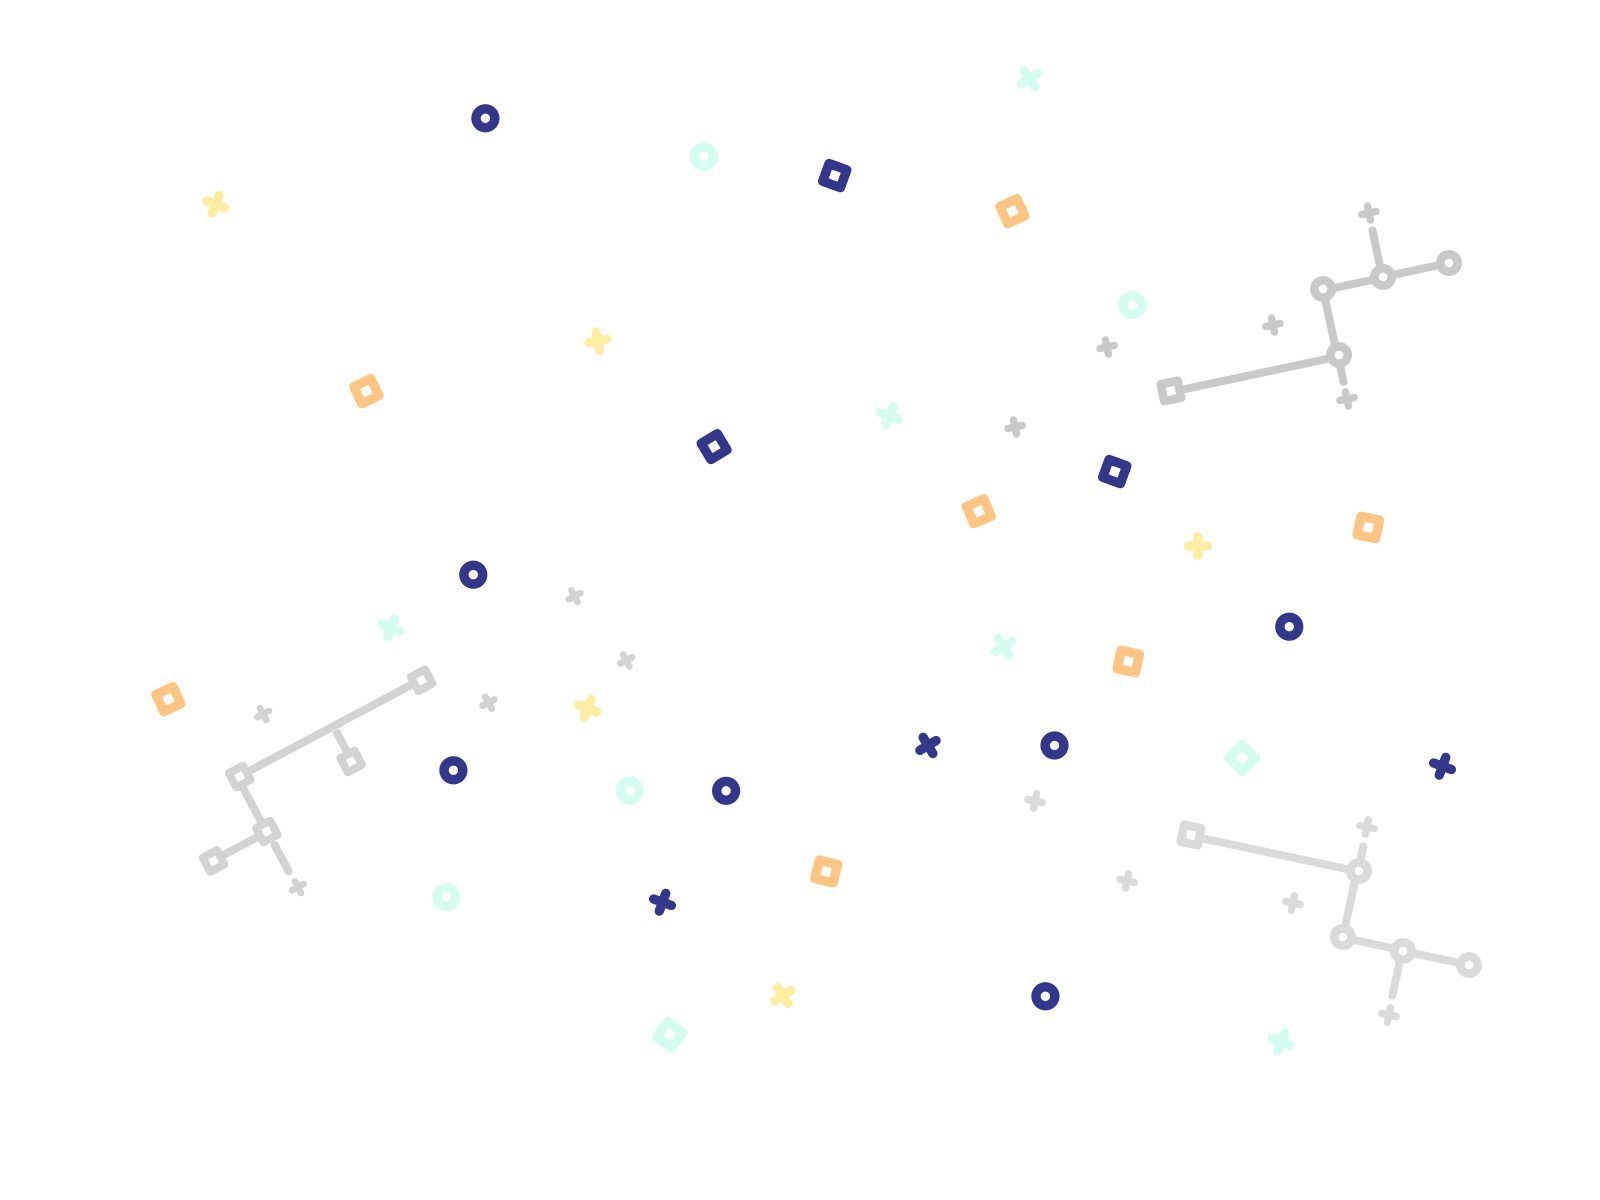 Colorful squares, circles, and crosses scattered in a random patter